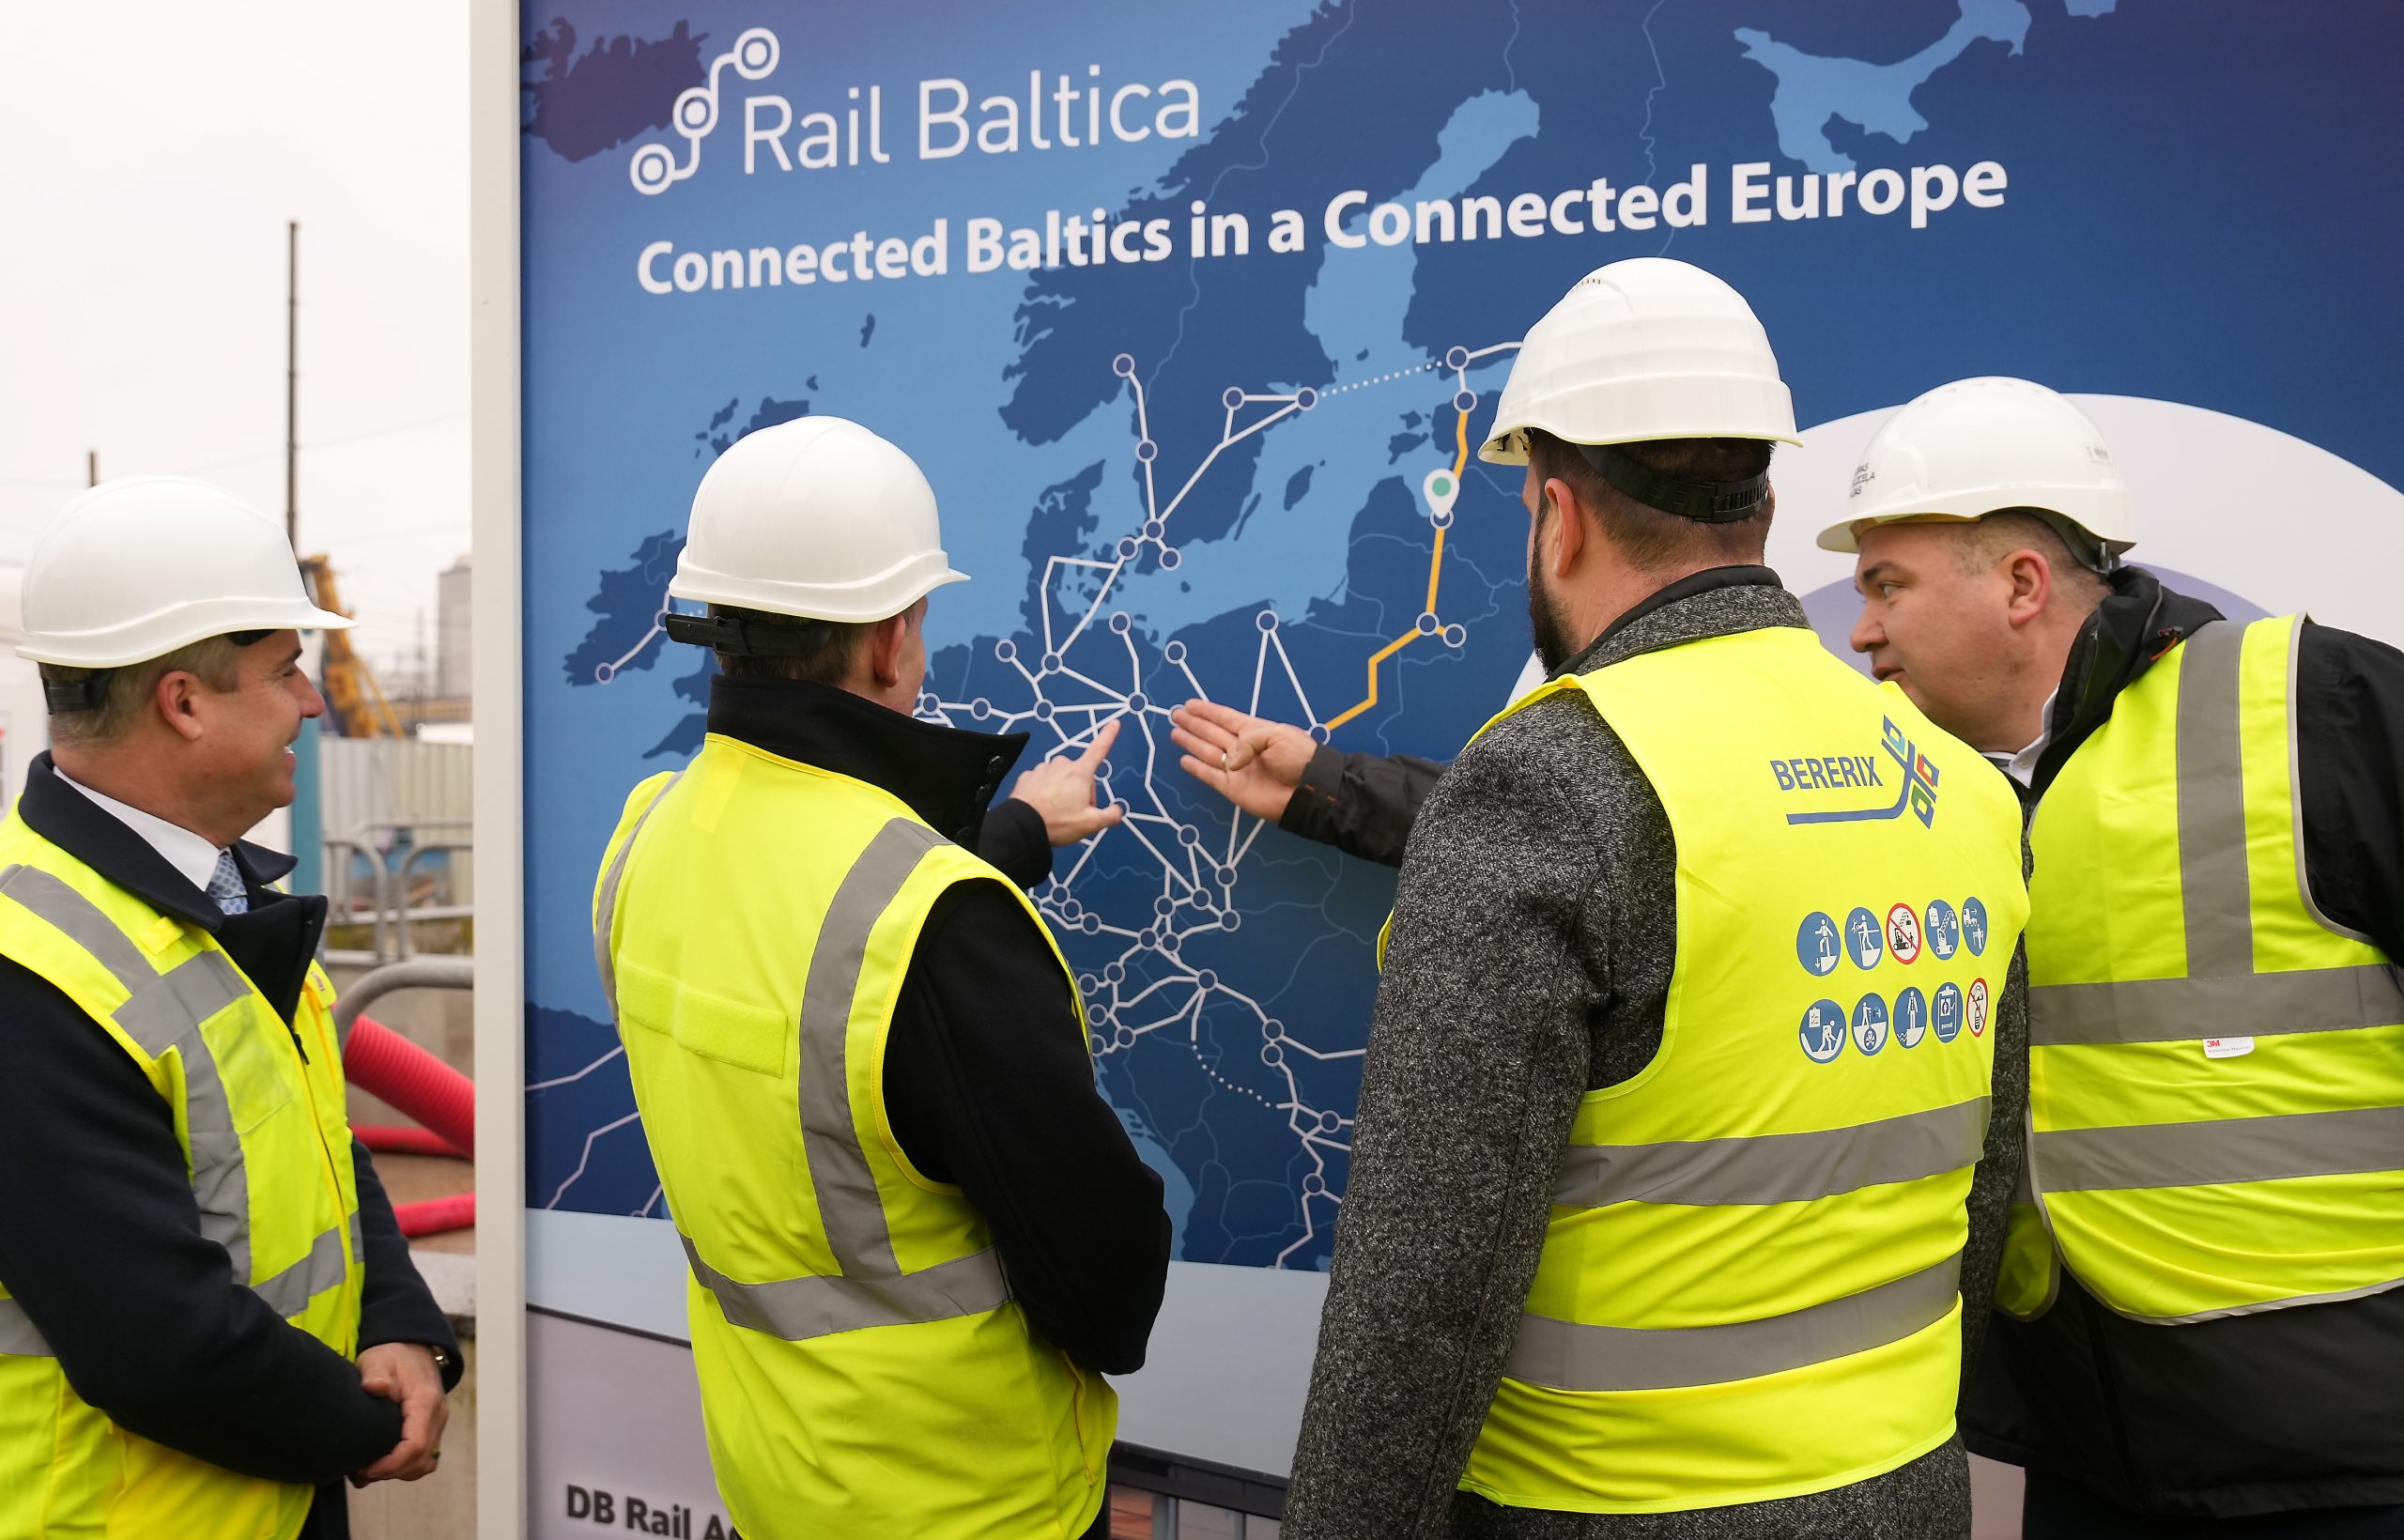 German Minister of Digital Affairs and Transport Volker Wissing and Jānis Vitenbergs Minister for Transport, Latvia are being showed the planned route of Rail Baltica